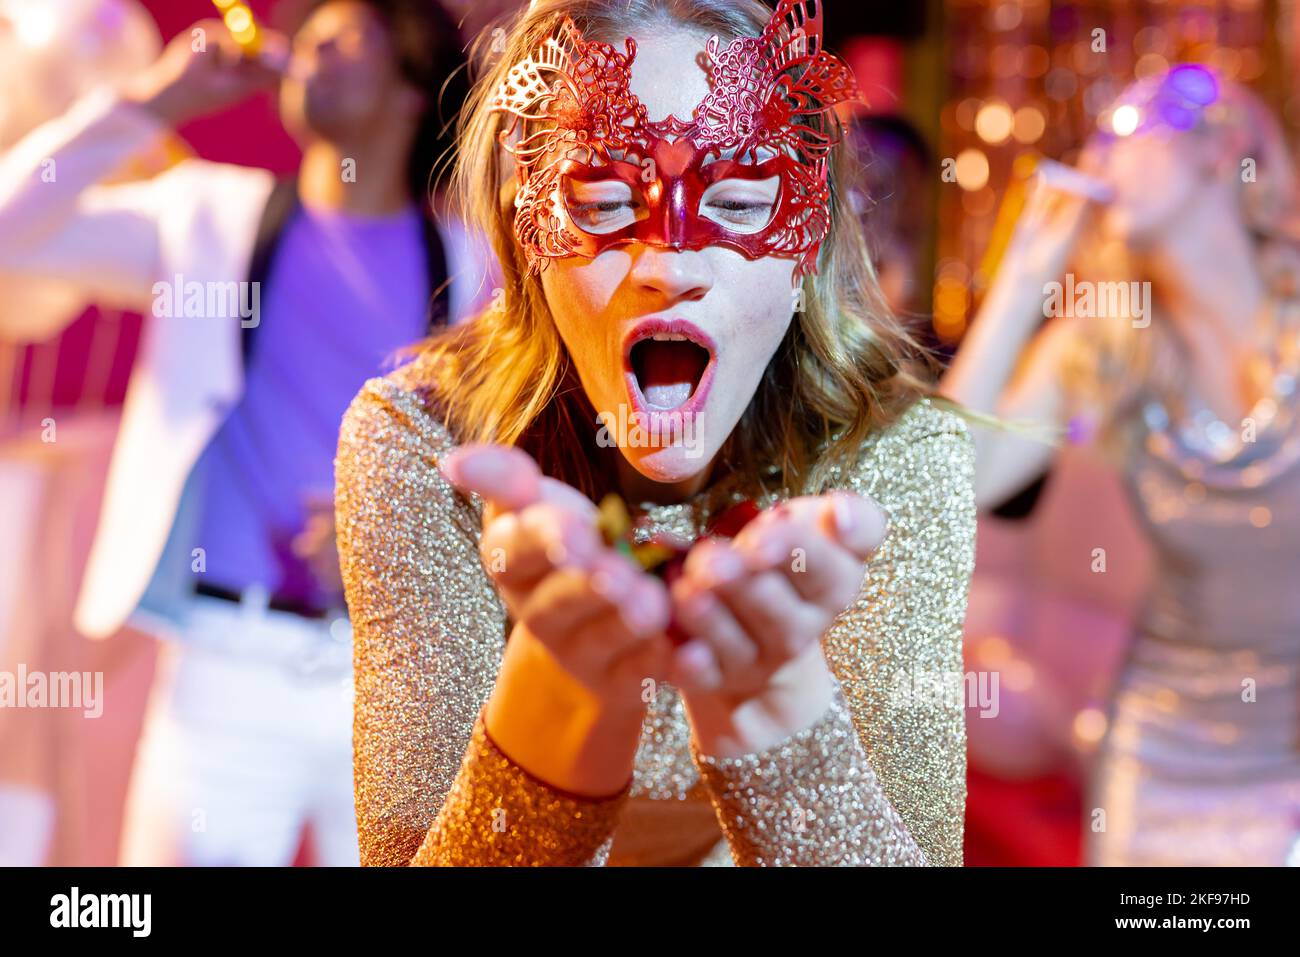 Happy caucasian woman in mask blowing glitter on the dancefloor at a party in a nightclub. Fun, going out, celebrating and party concept. Stock Photo